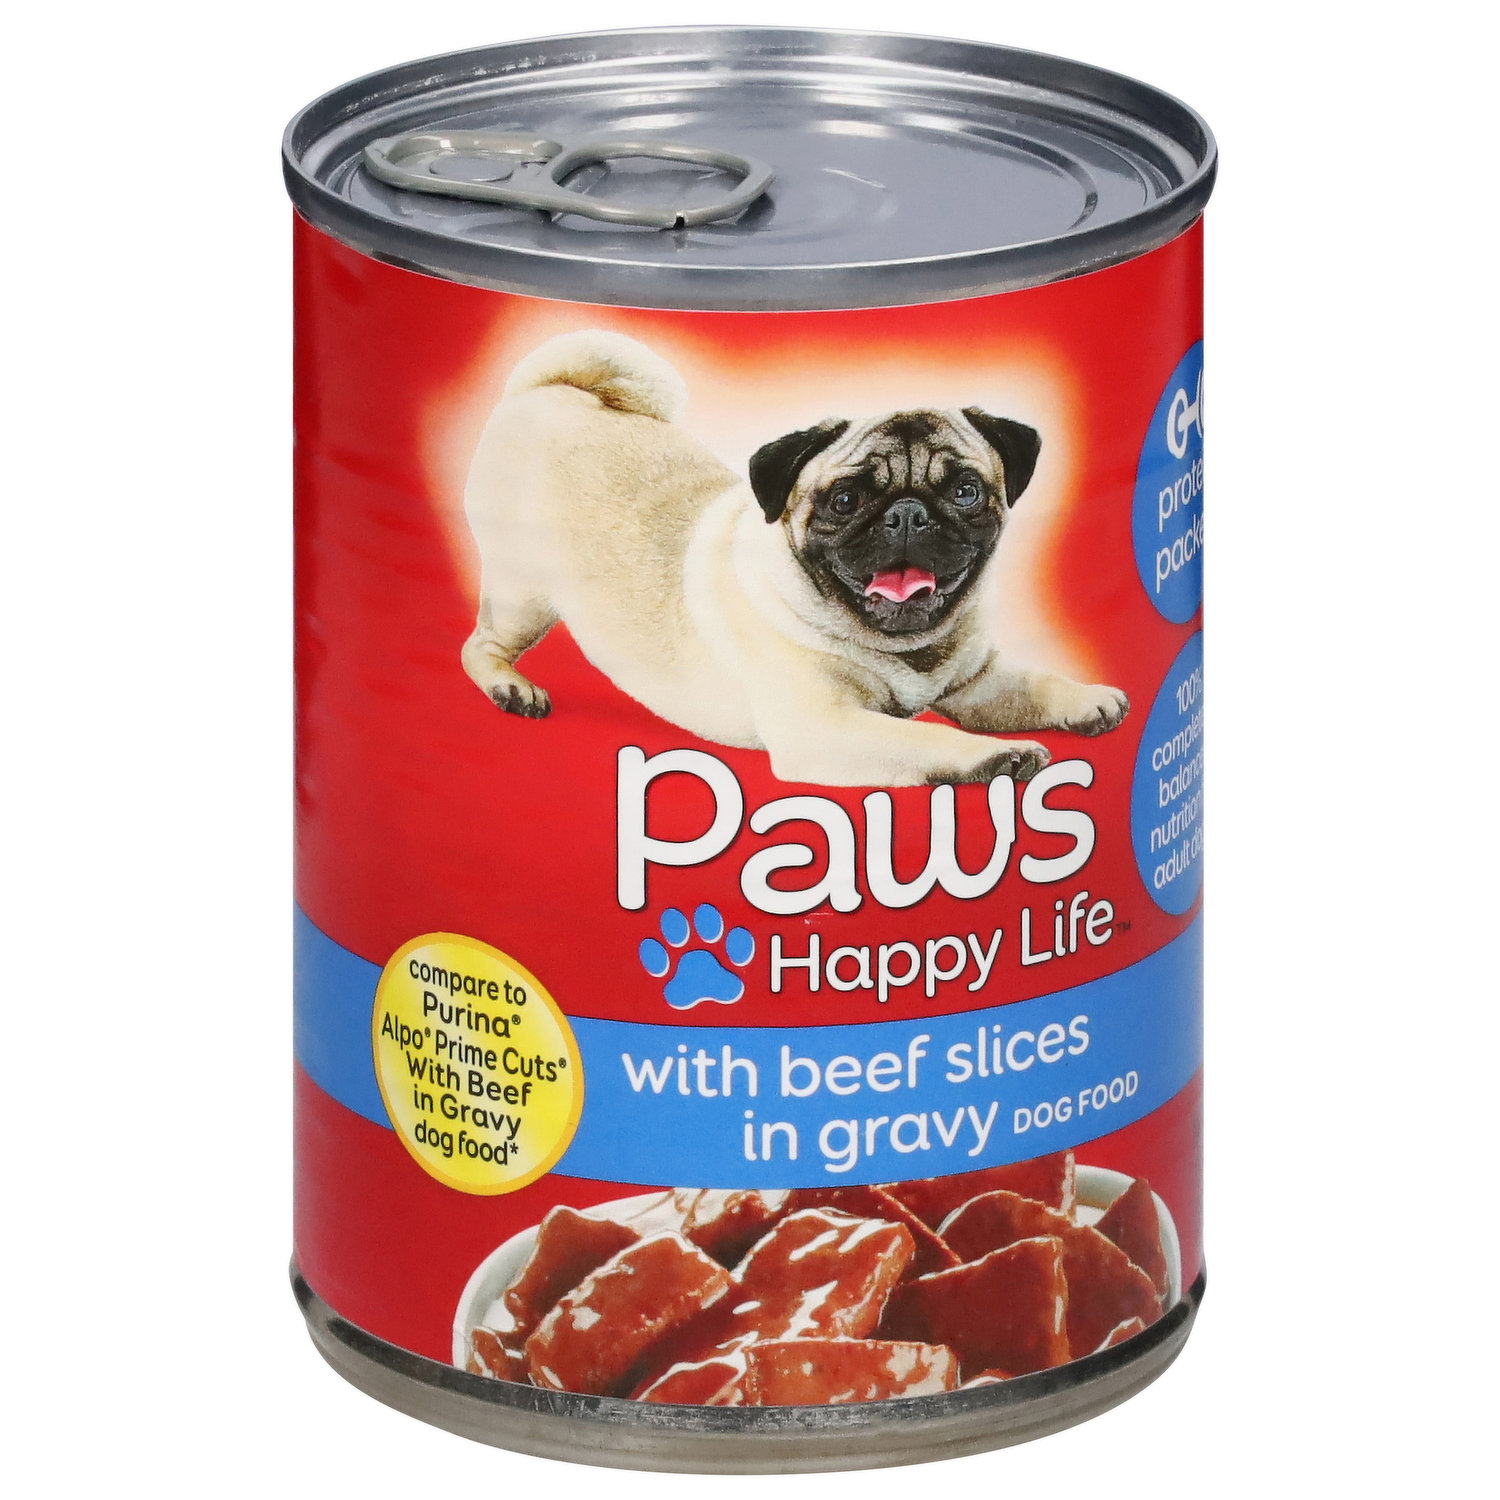 Paws Happy Life Dog Food, with Beef Slices in Gravy - King Kullen